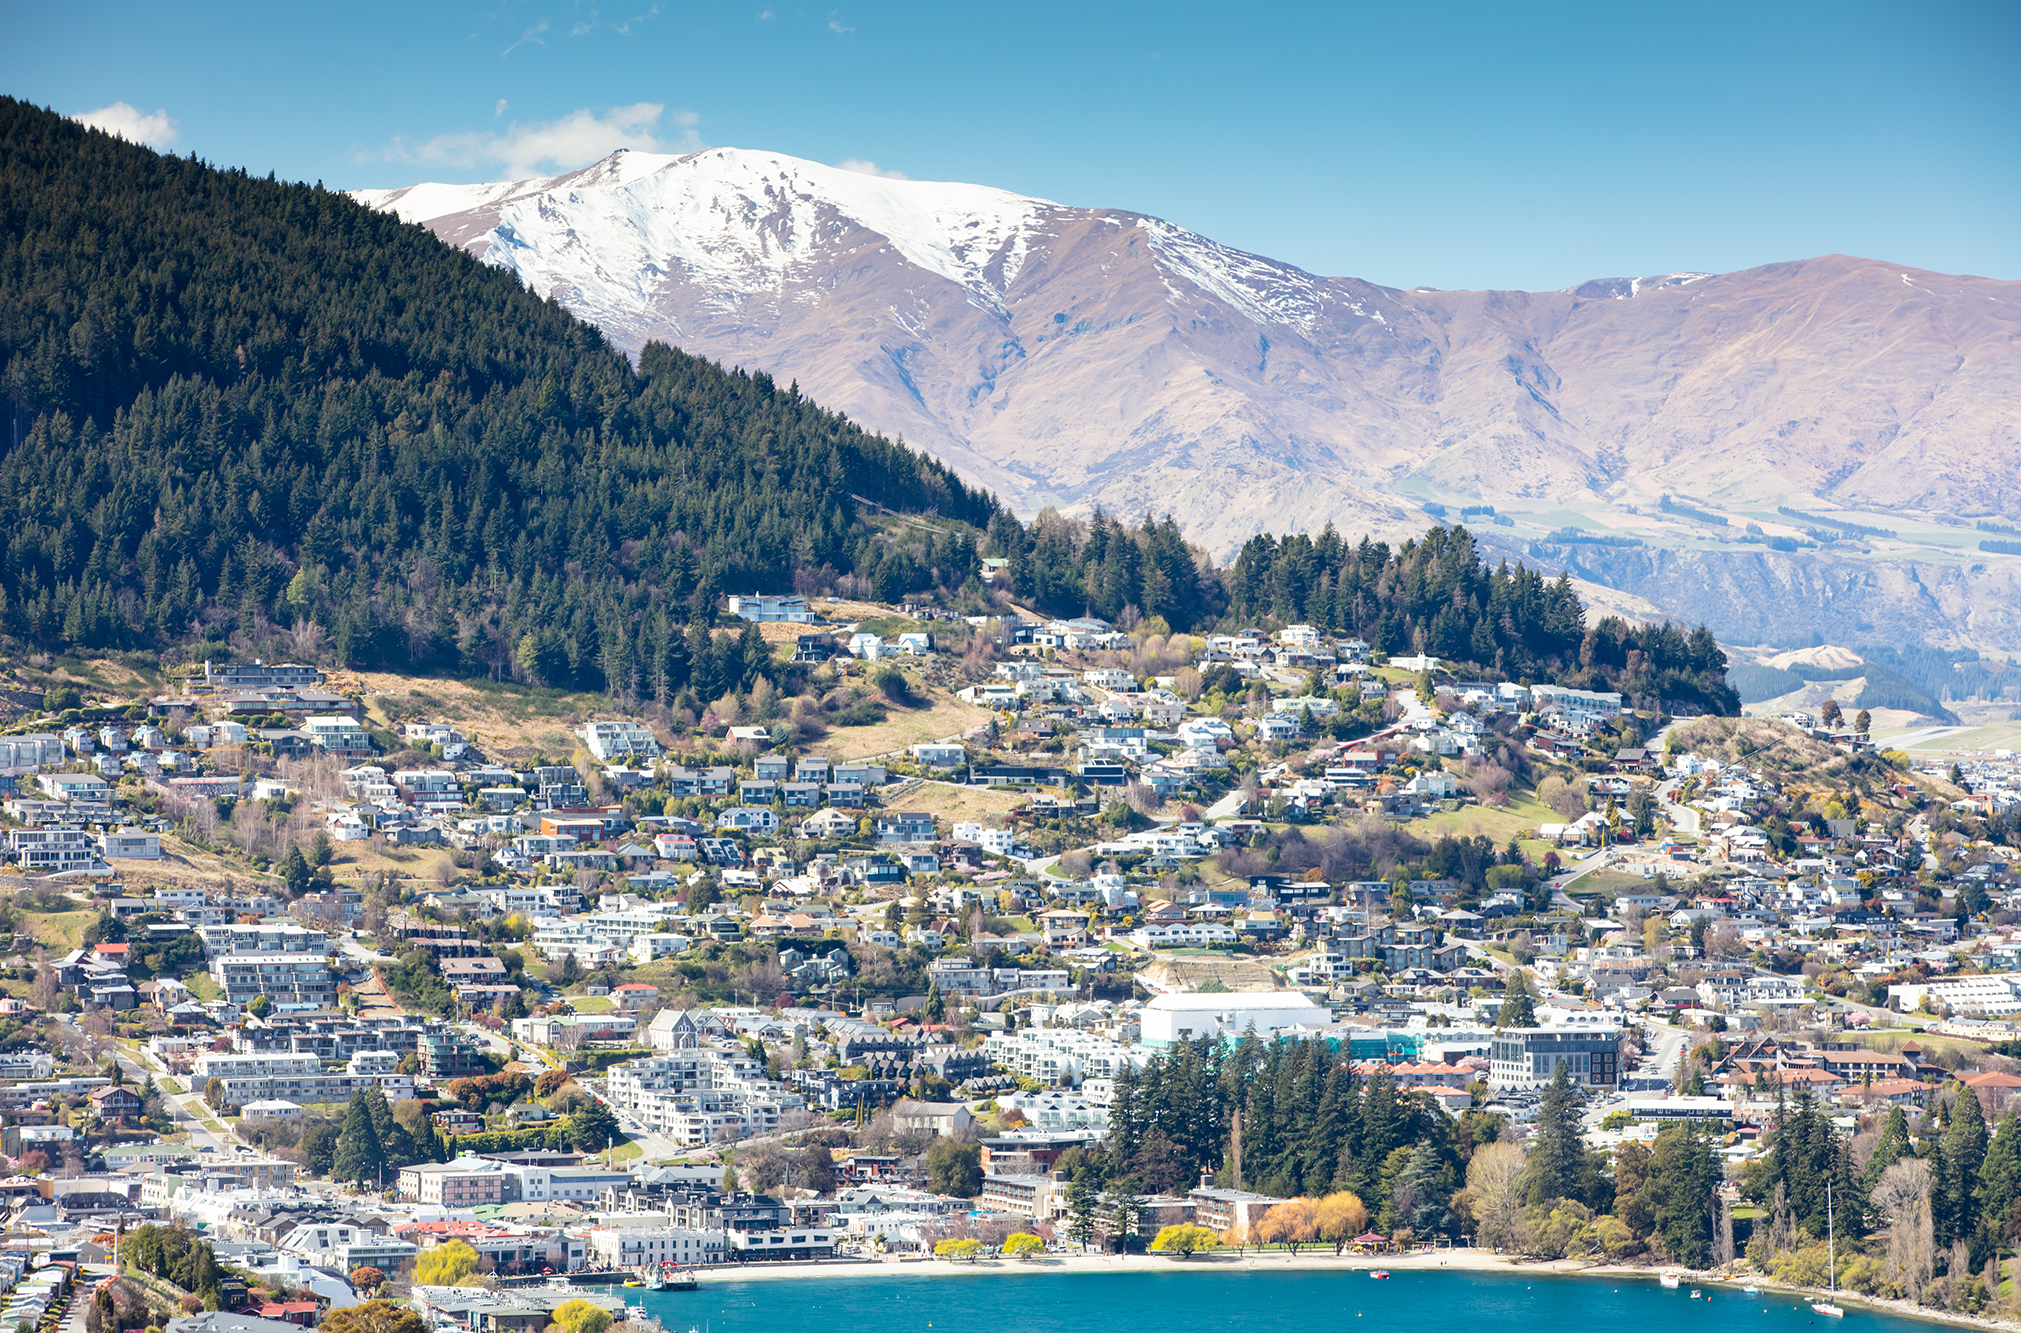 Aerial view of Queenstown showing land use and urban development.